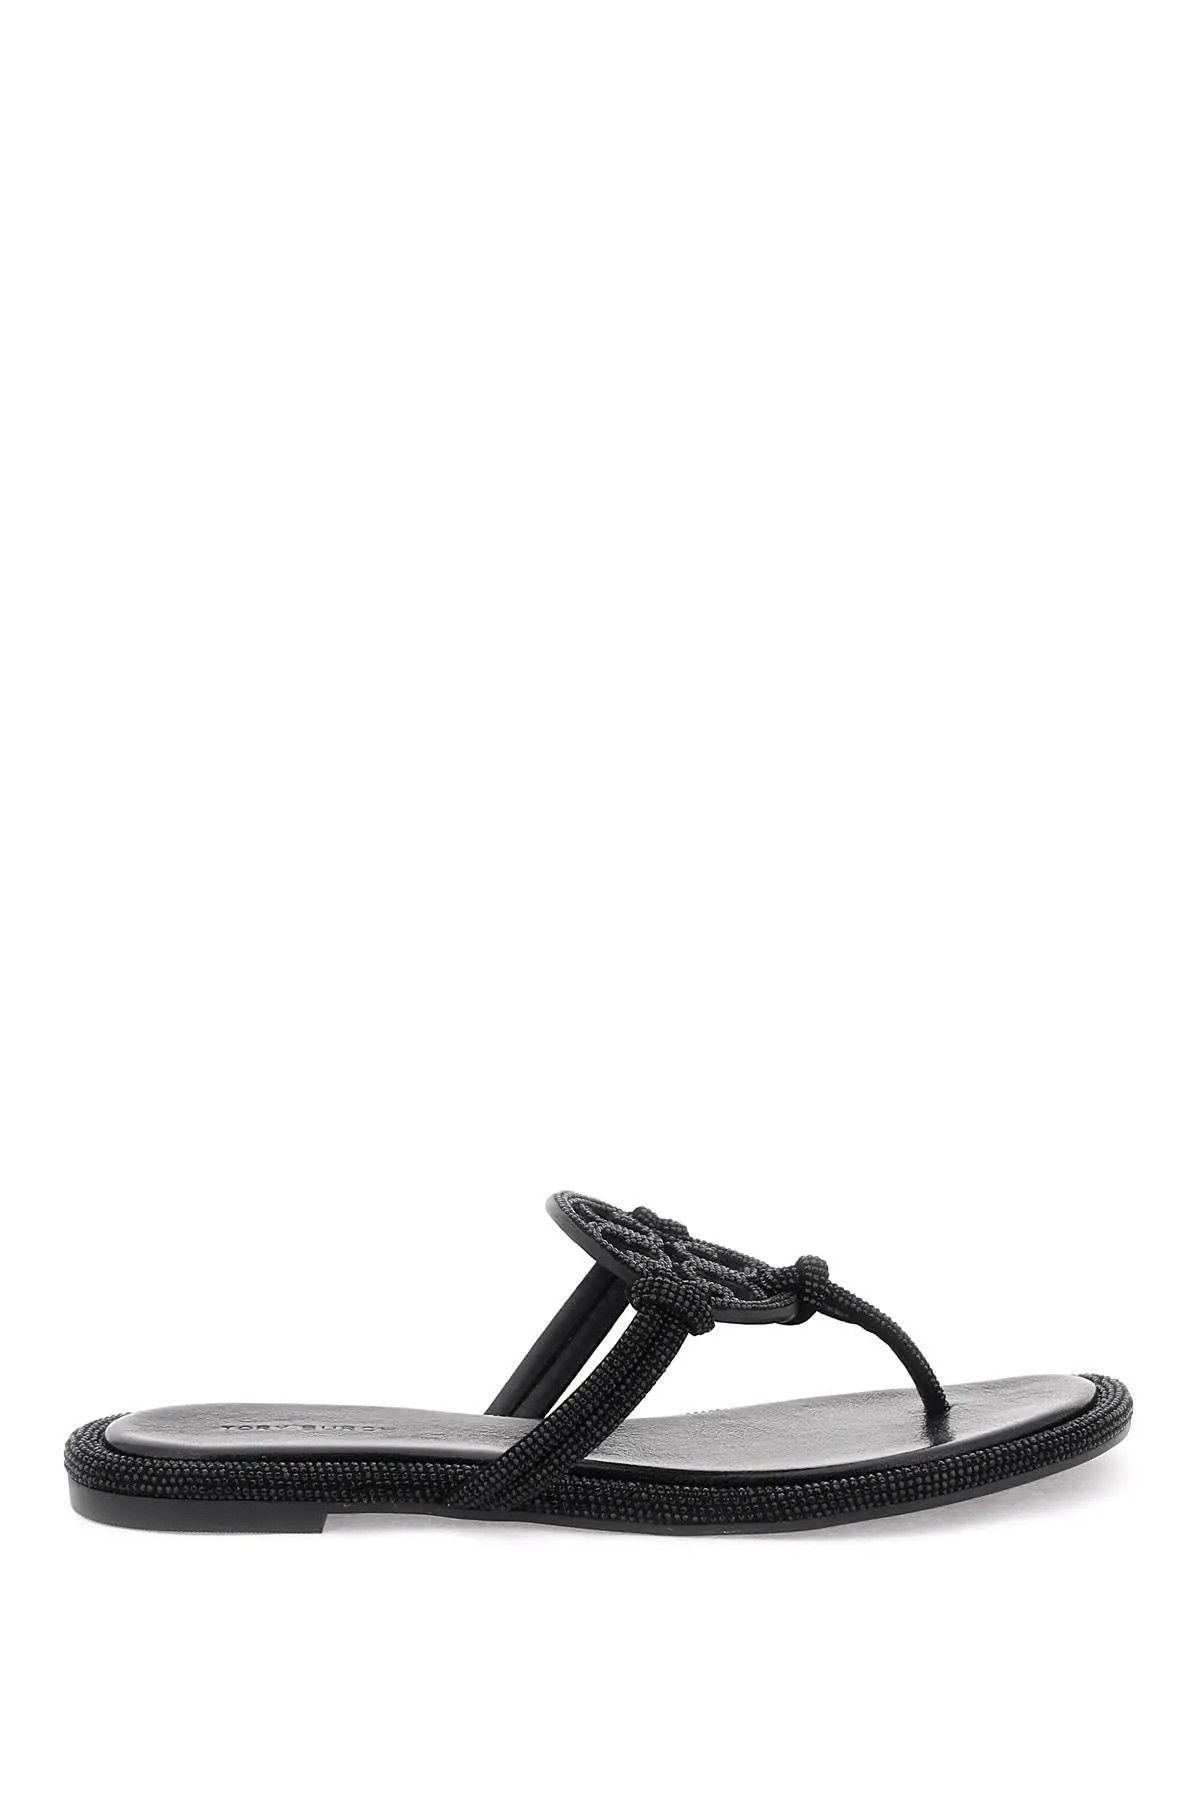 Tory Burch o1s22i1n1223 Pavé Leather Thong Sandals in Black | Grailed